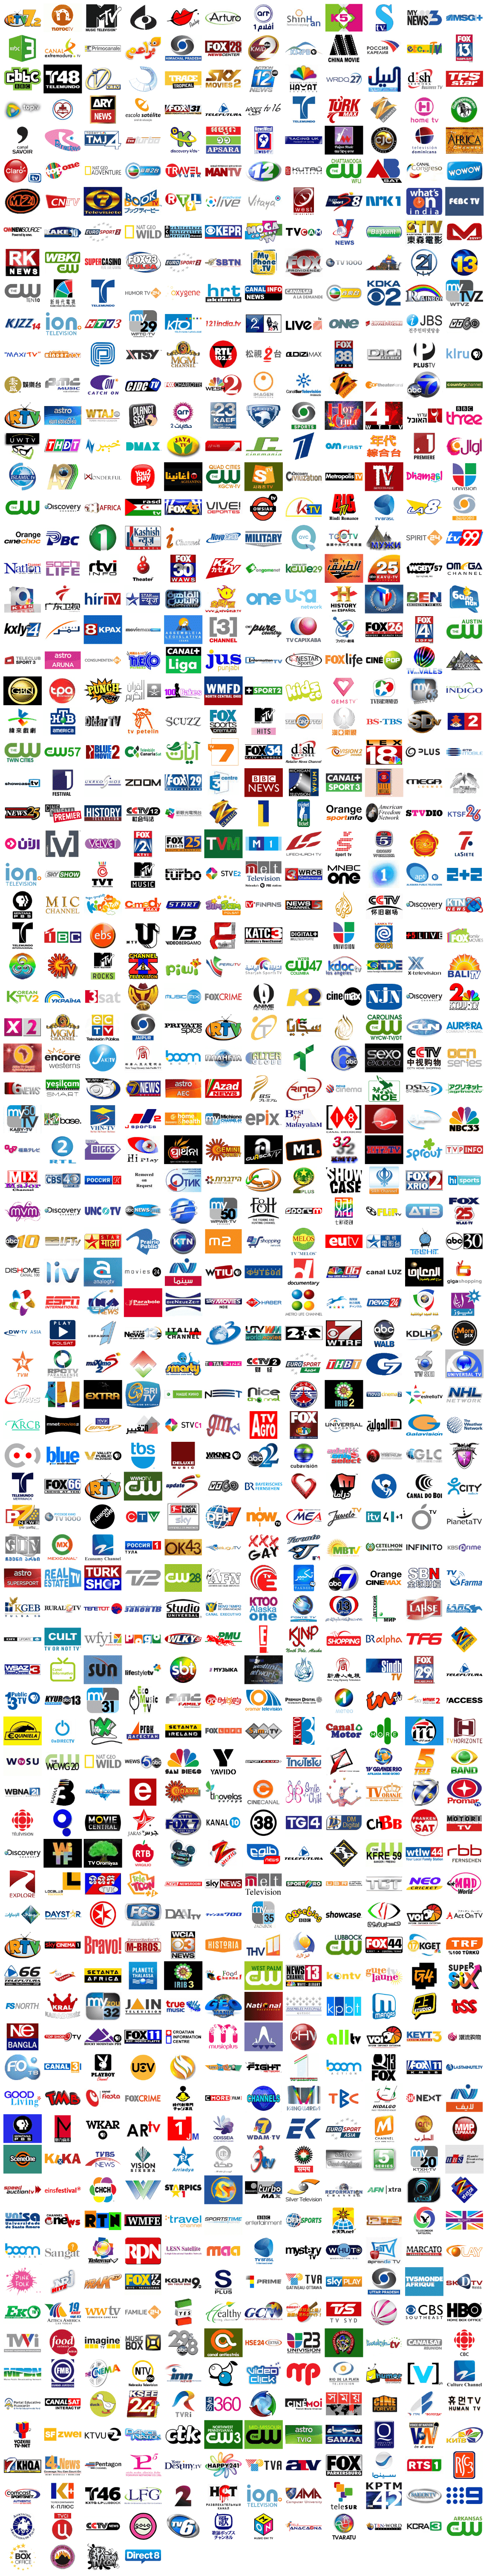 All TV Channels Logo - TV Channel Logos (Page 1 of 7) - The CableTV Blog | Design-able ...